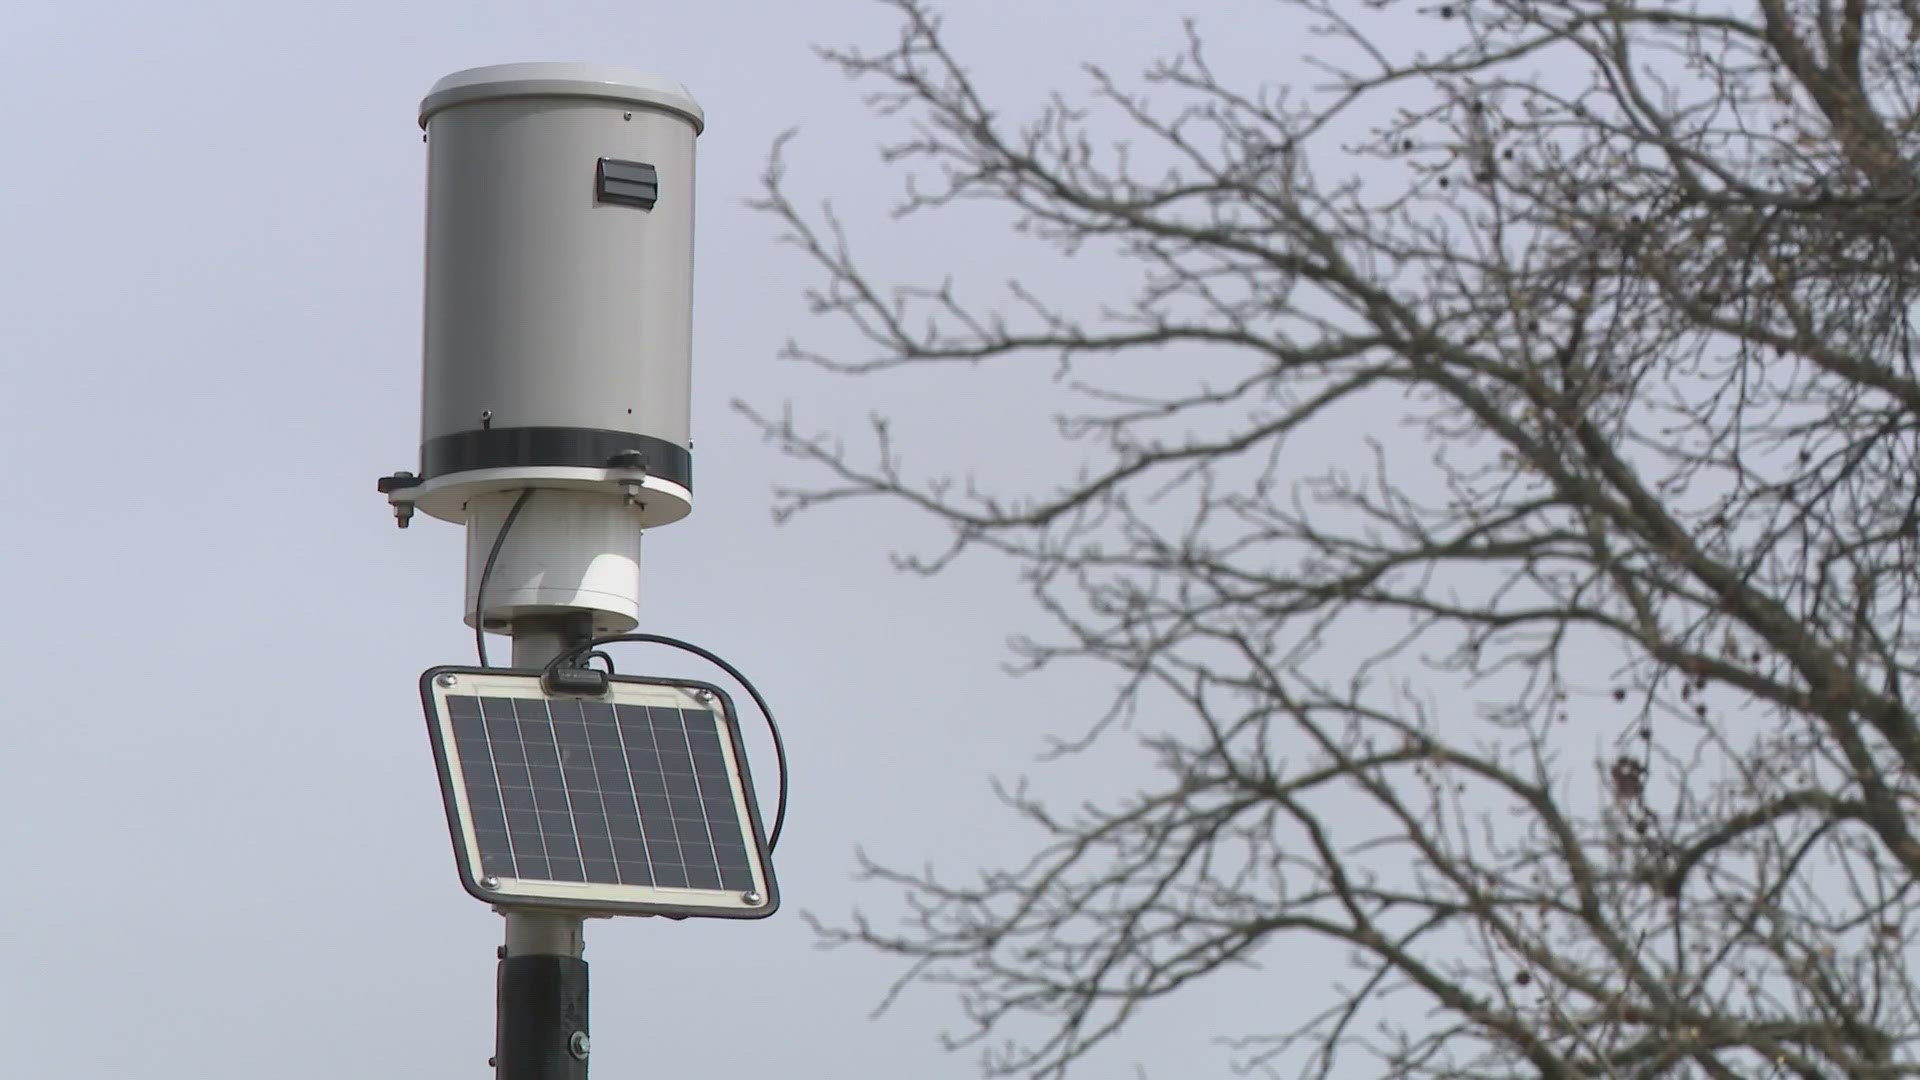 After historic flooding last year, the city is hoping the new technology will help residents stay dry.